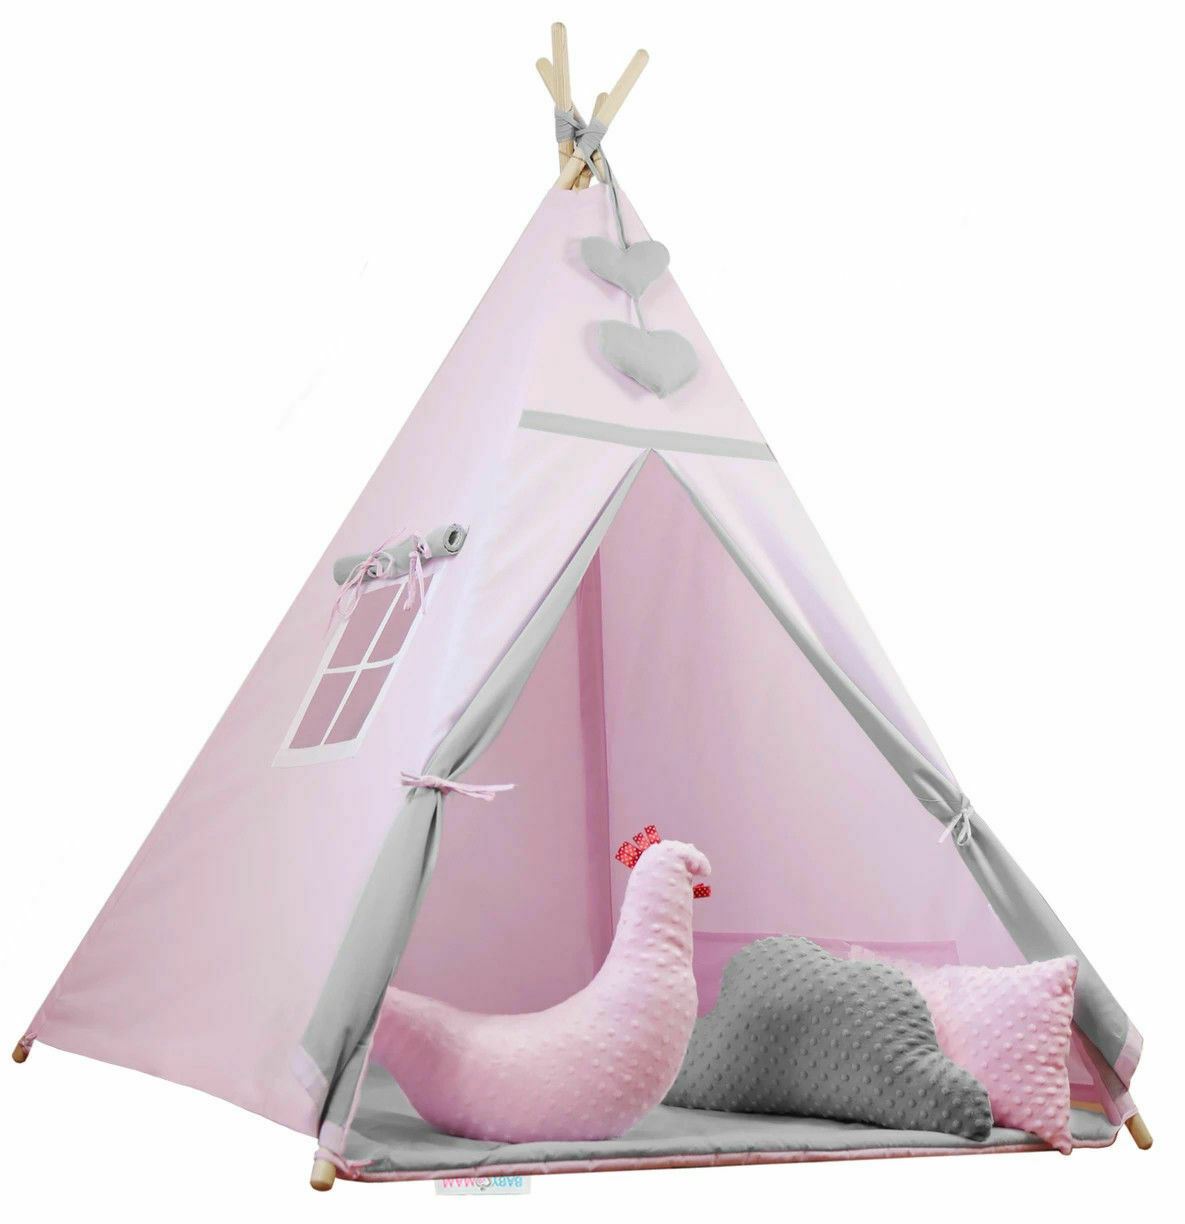 Teepee Wigwam Indoor Outdoor Kids Playhouse Tent With Three Cushions Princess Castle